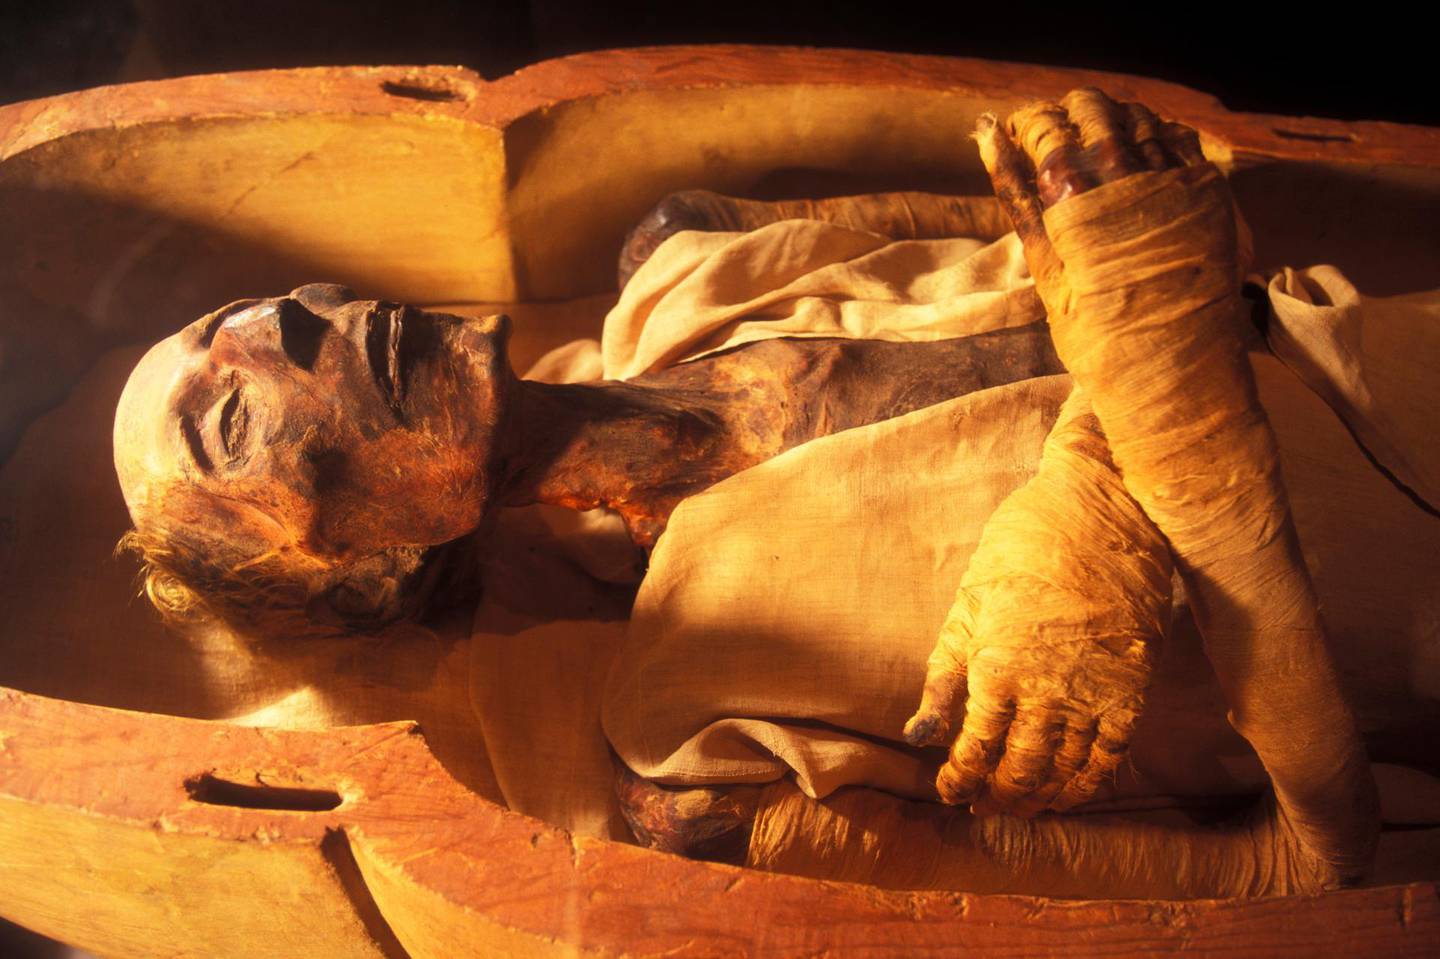 CAIRO, EGYPT - APRIL 2006:  The mummy of Ramses II (1301-1235 BC), son of Sethy I, in April 2006, at Cairo Museum, Egypt. The mummy was discovered with the other royal mummies in the Deir el Bahari hiding place by Maspero, Ahmed Bey Kamal and Brugsch Bey. (Photo by Patrick Landmann/Getty Images)